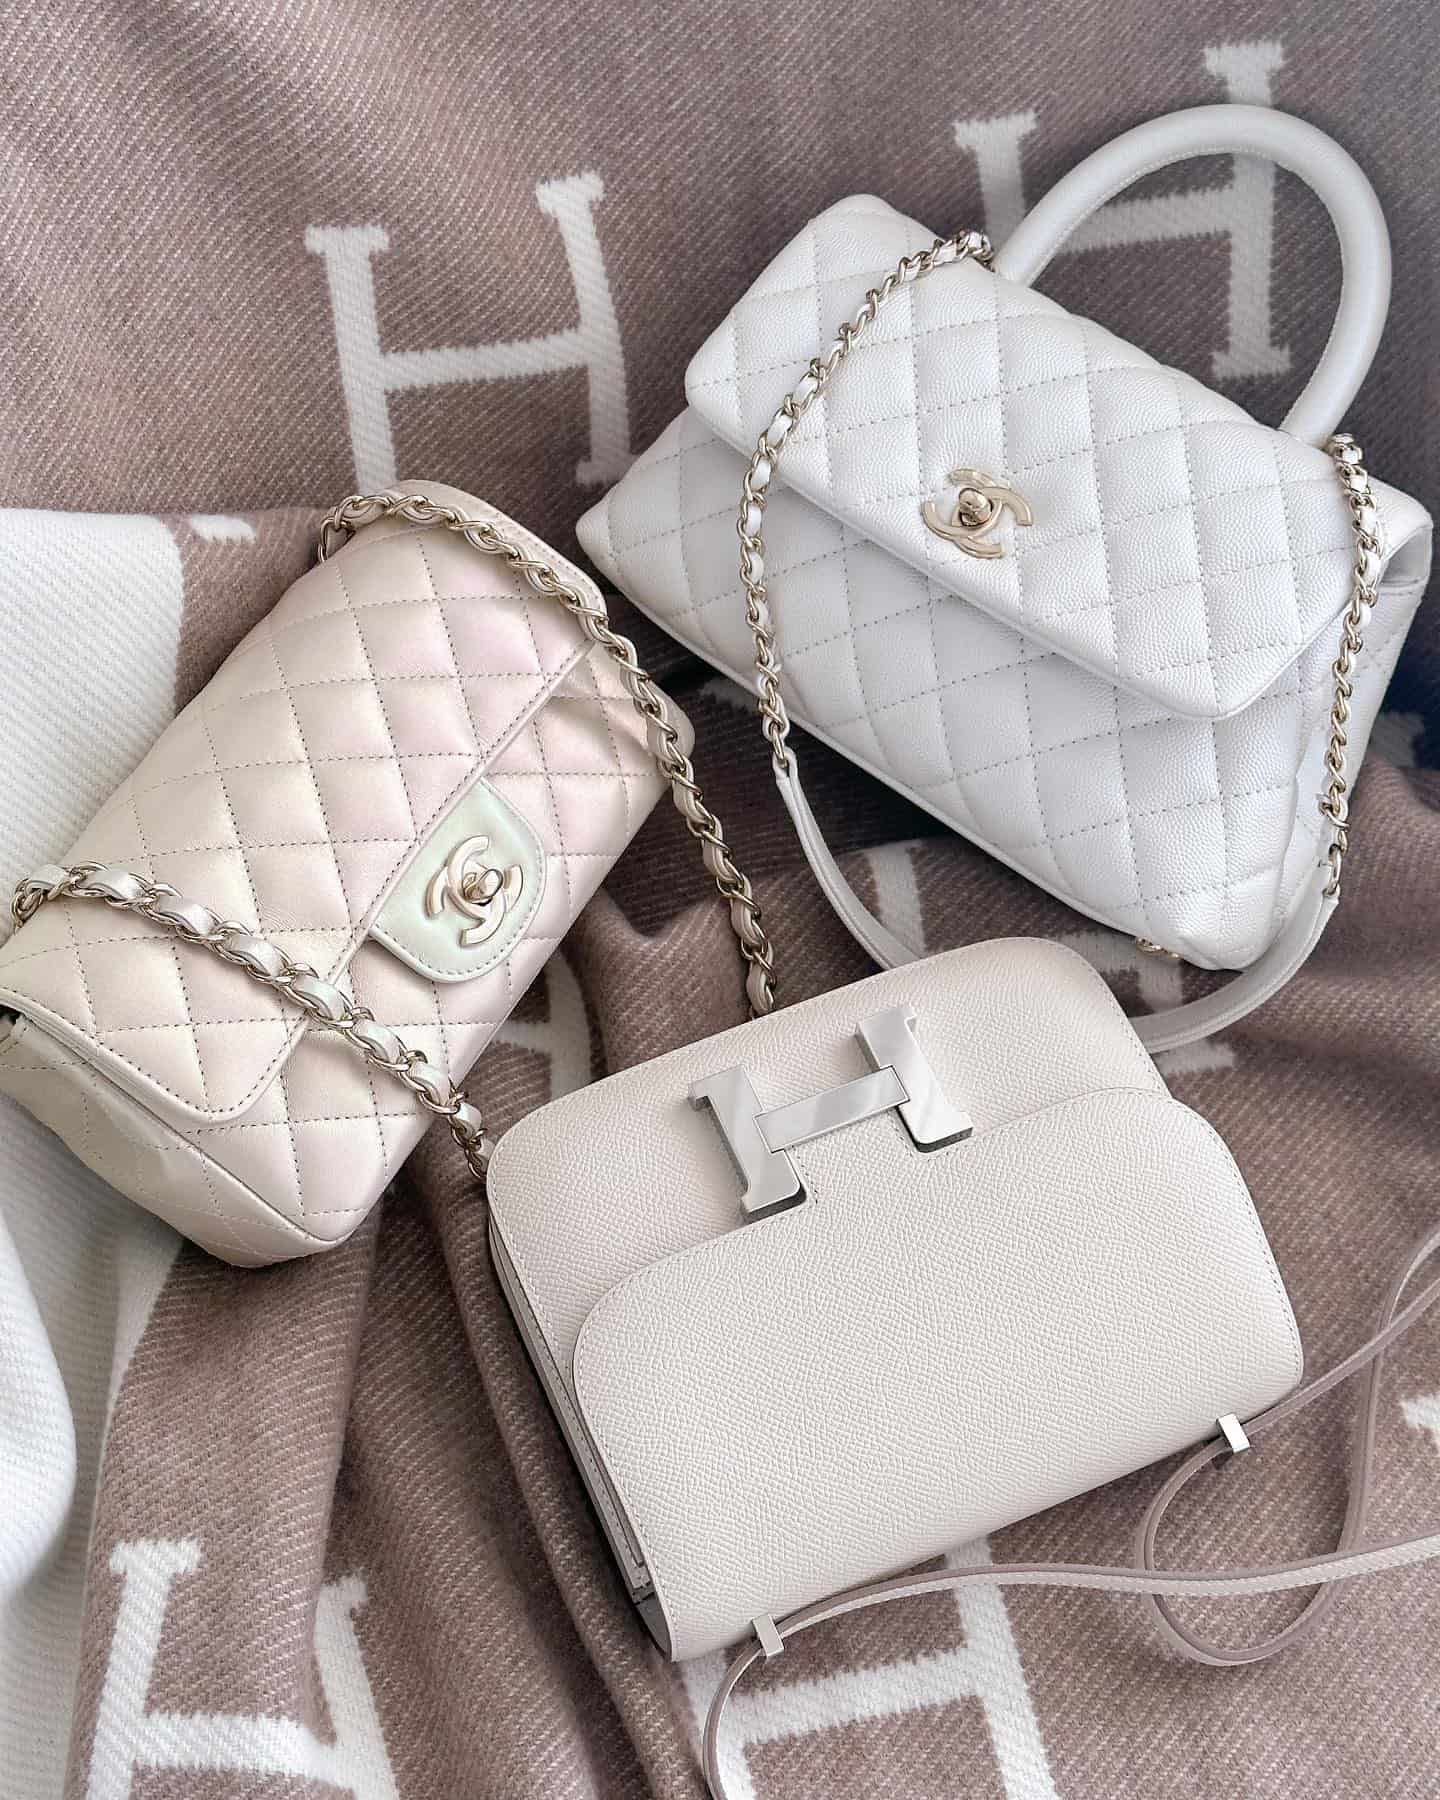 White Hermes Bags and Chanel